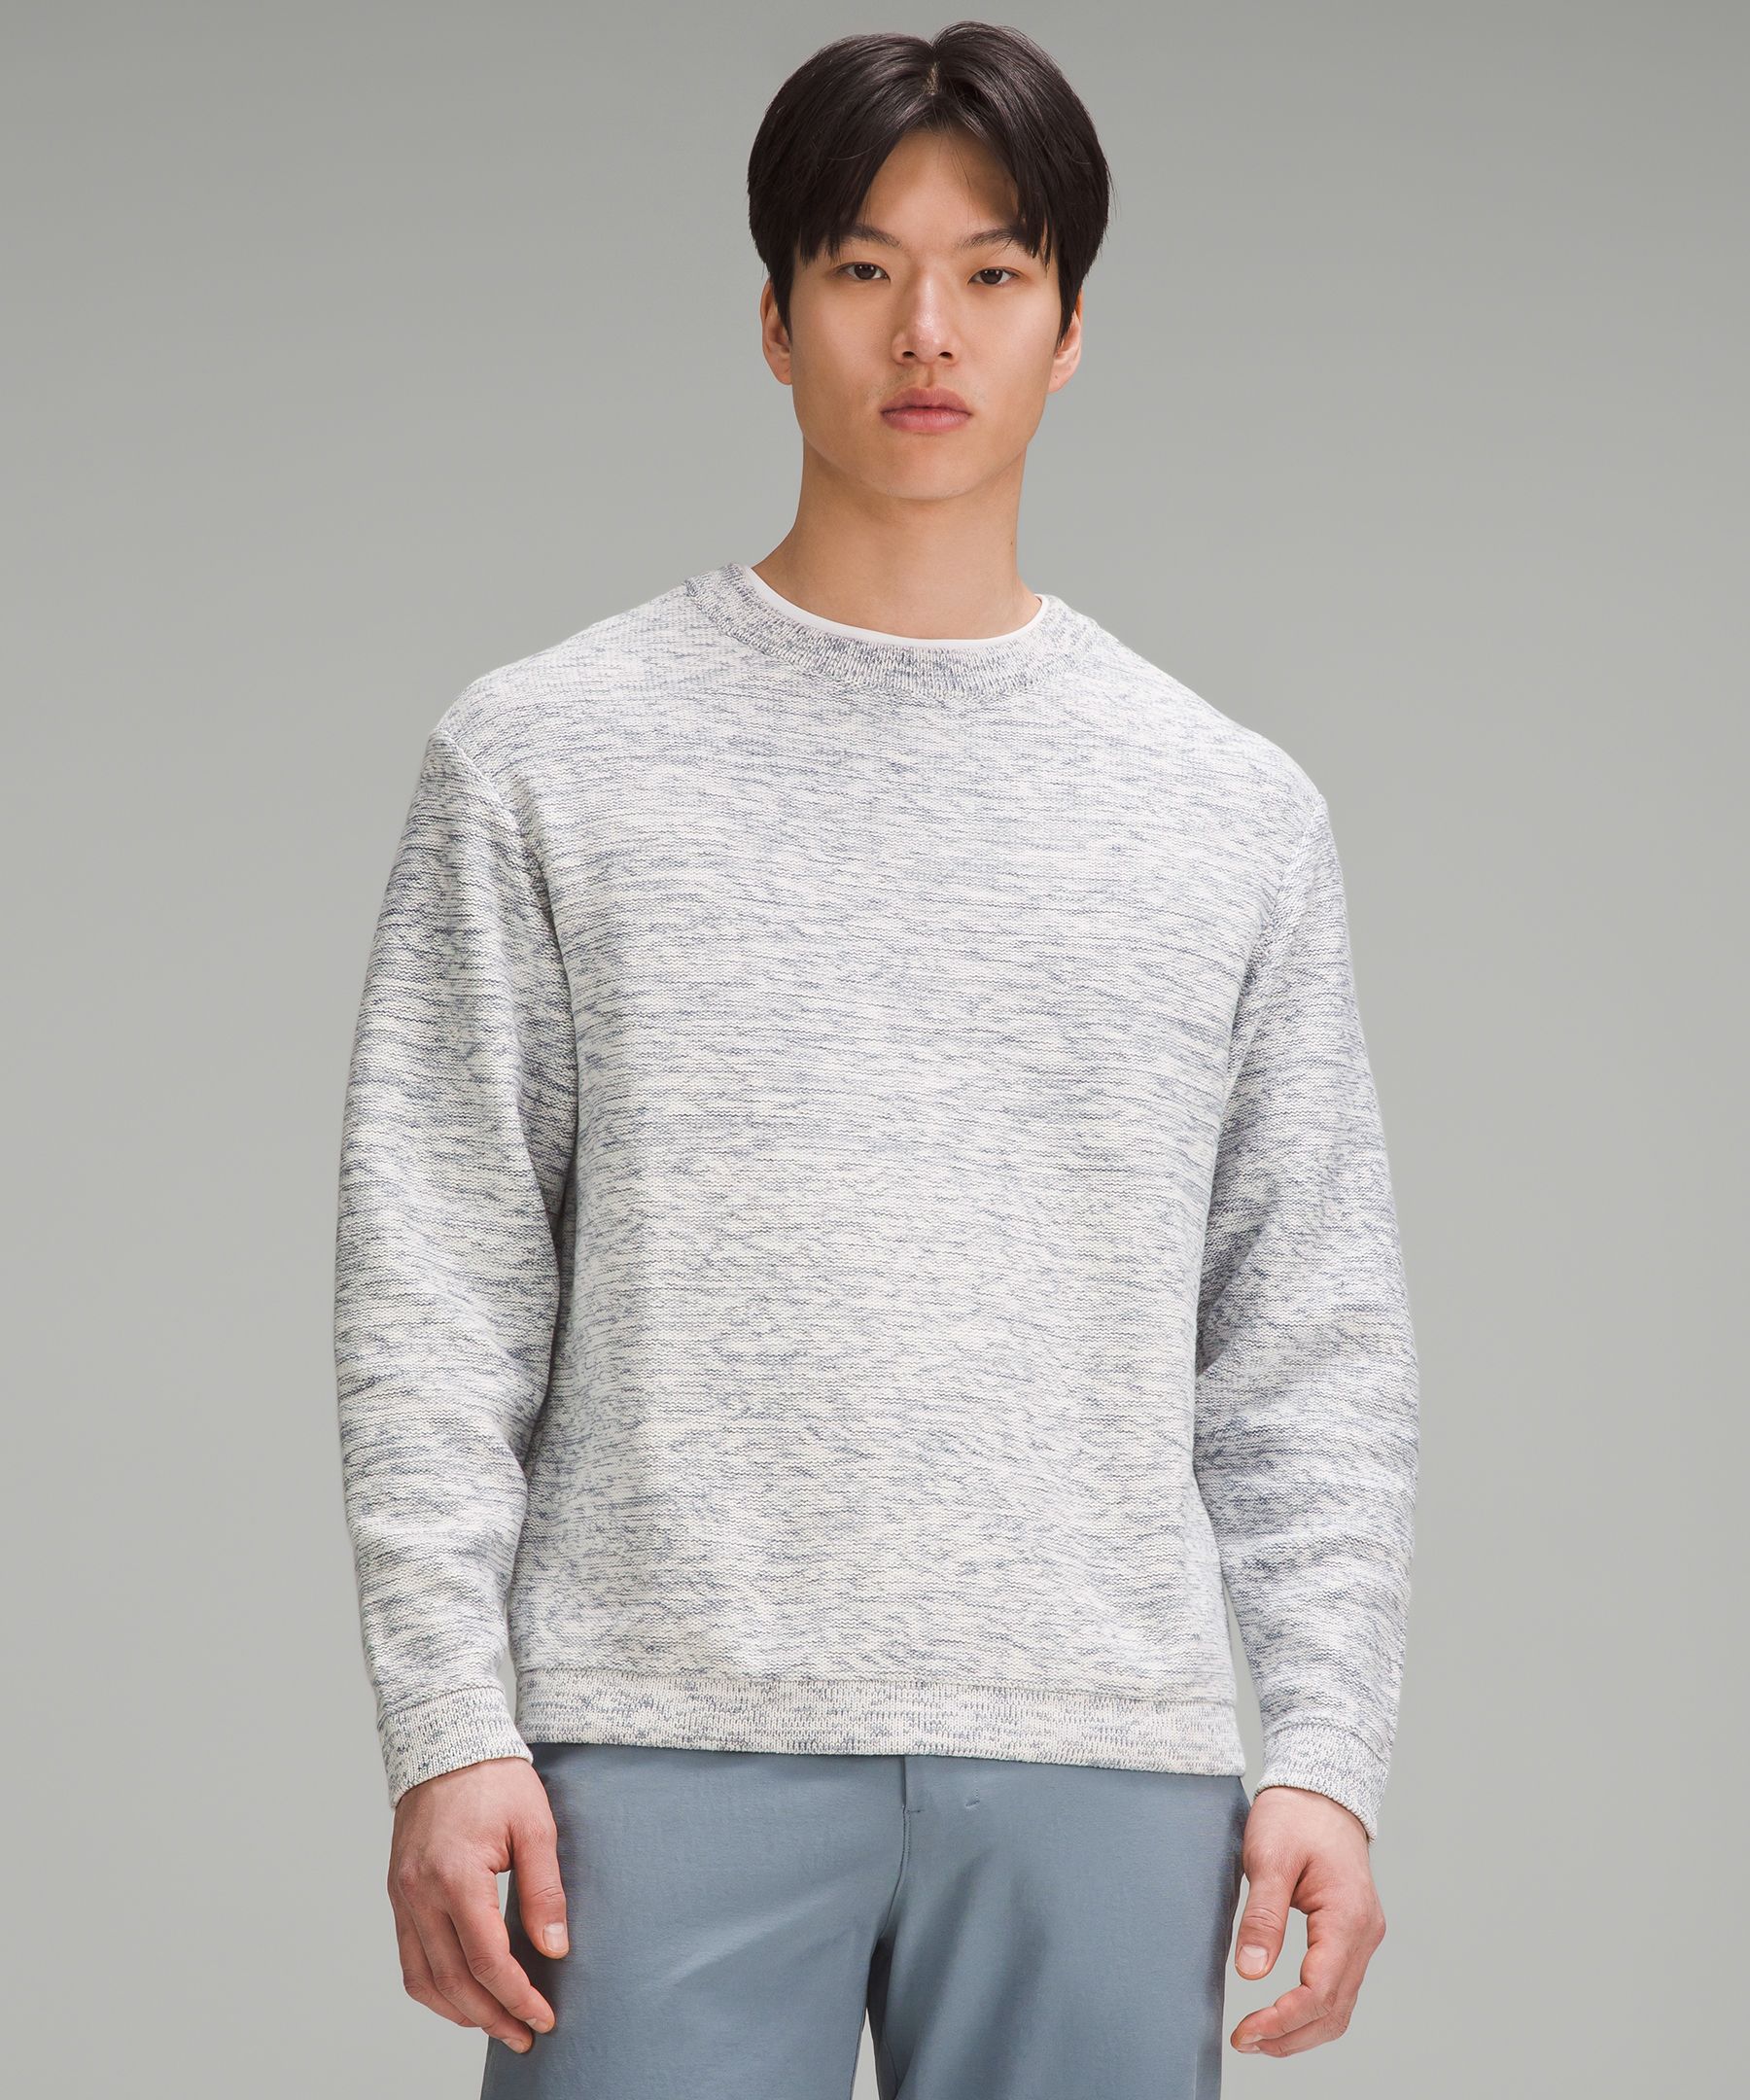 Relaxed-Fit Crewneck Knit Sweater | Men's Hoodies & Sweatshirts